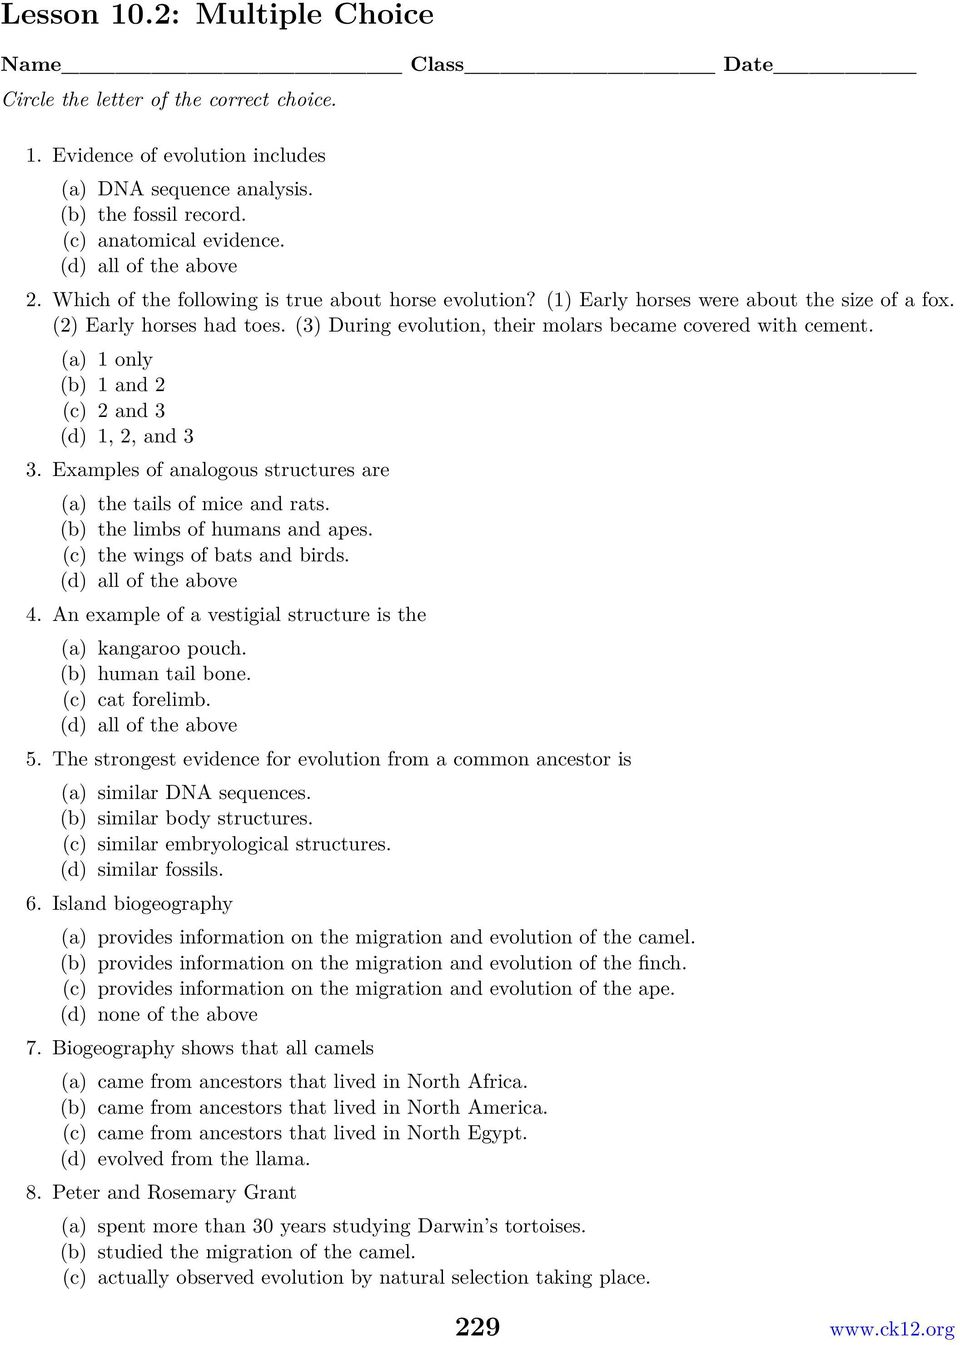 Bill Nye Biodiversity Video Worksheet Answers - Promotiontablecovers Pertaining To Bill Nye Biodiversity Worksheet Answers